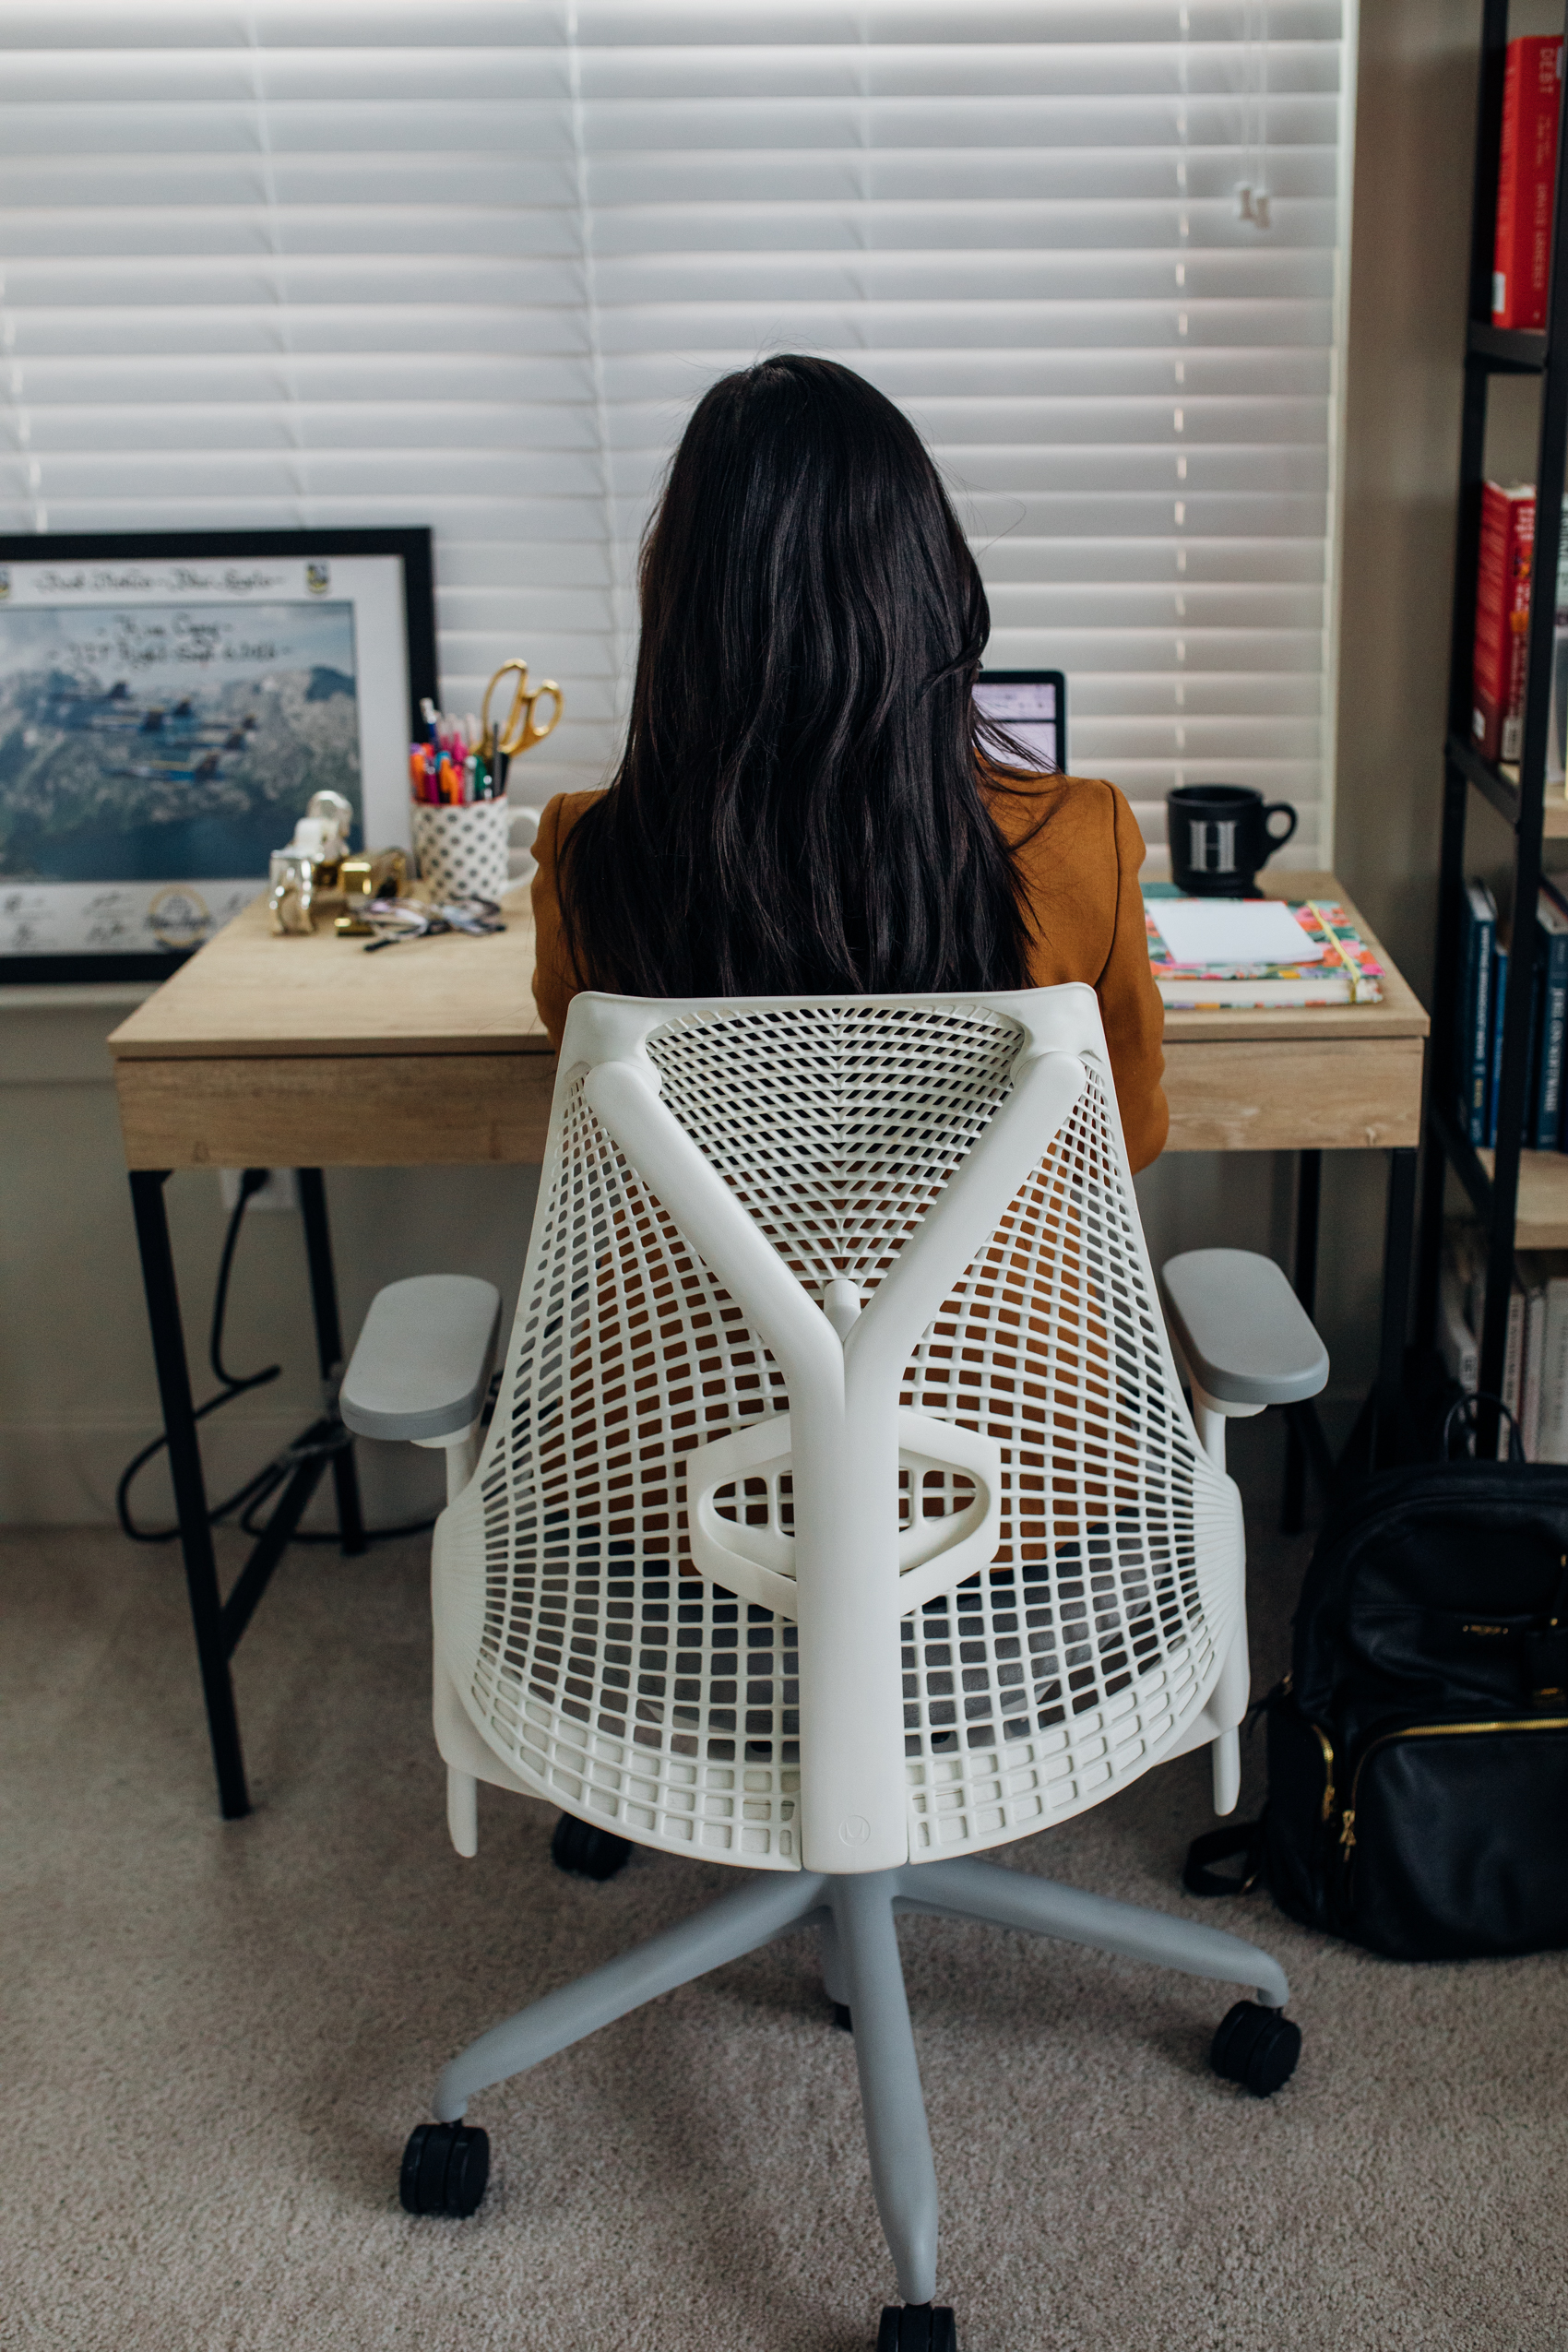 Herman Miller Sayl chair and writing desk in Dallas home office